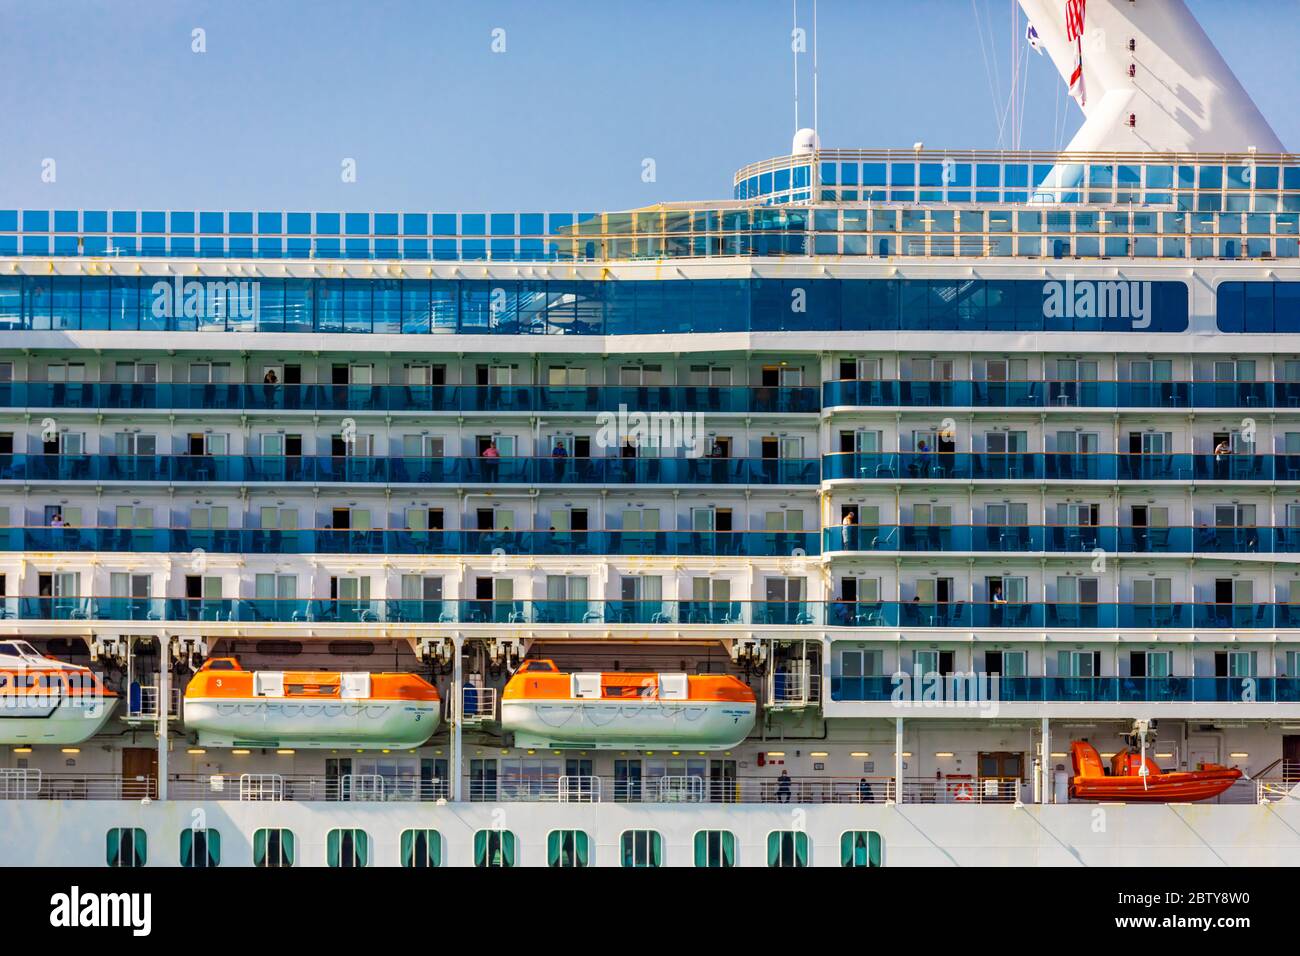 Princess Cruises cruise ship the Coral Princess is finally allowed to dock in Miami with sick passengers with the COVID-19 virus, Miami, Florida, Unit Stock Photo